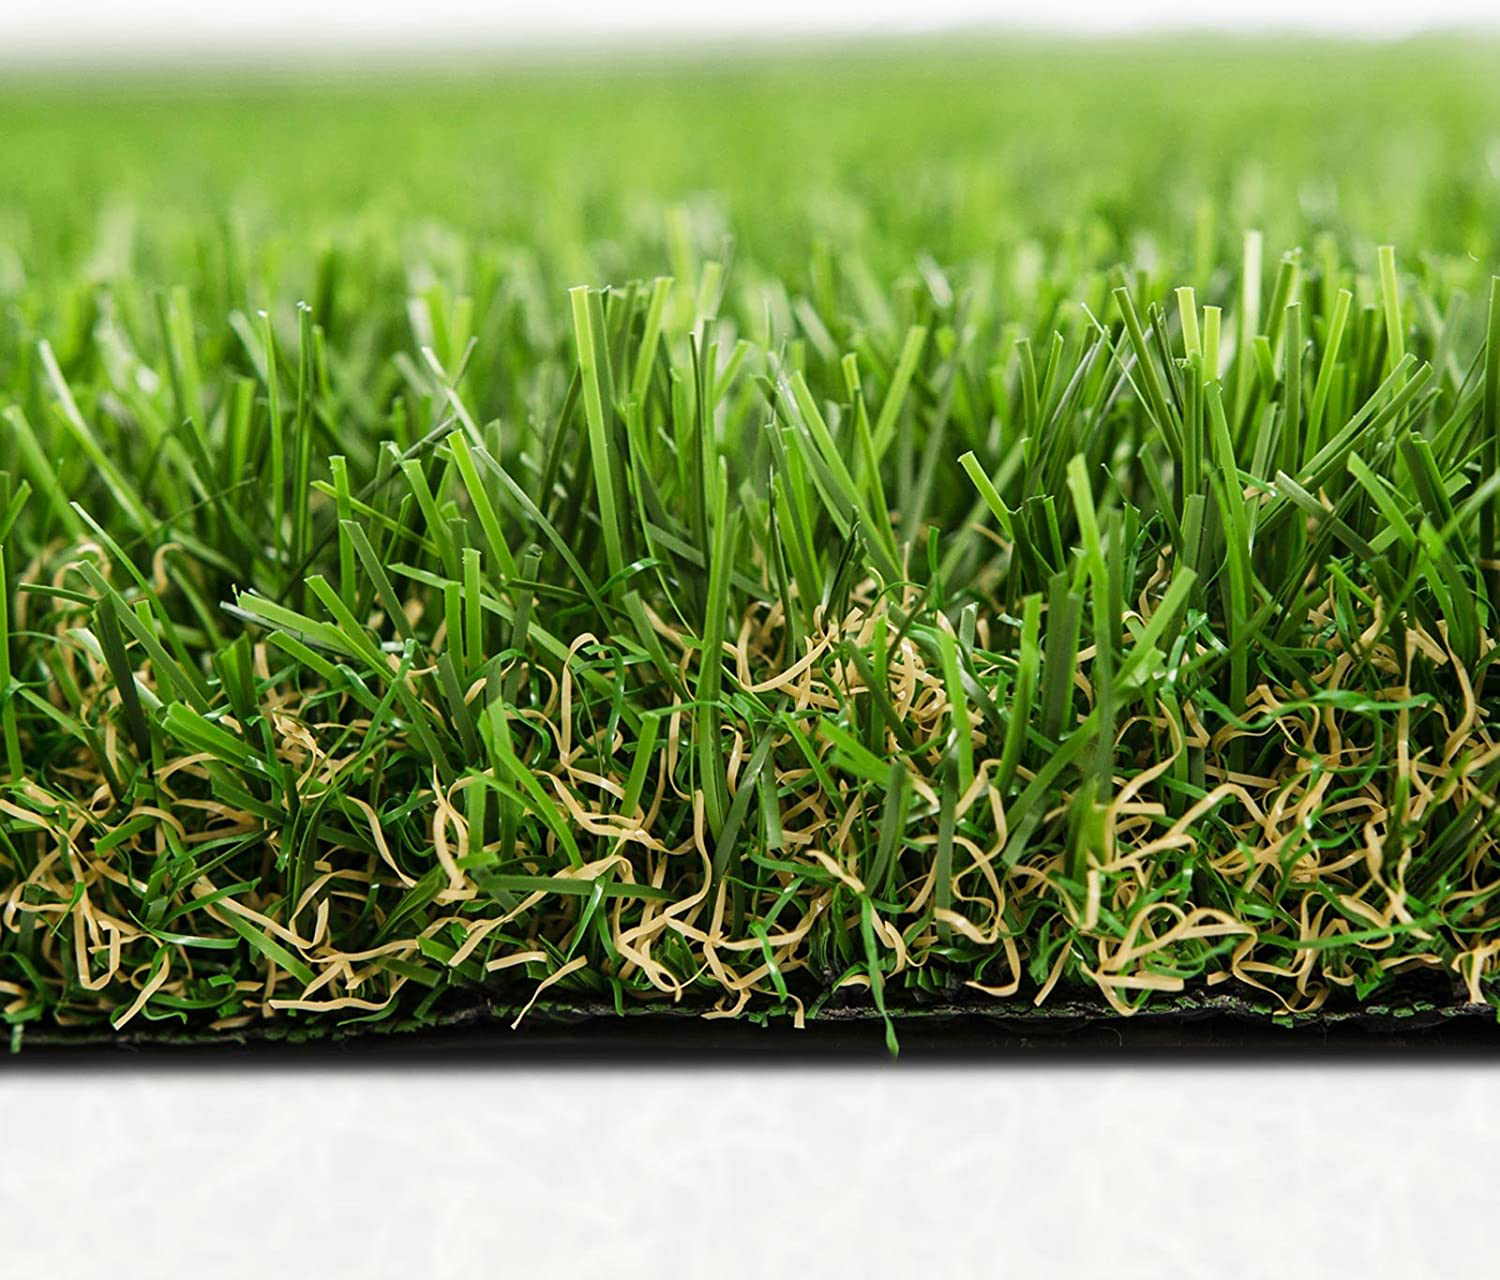 PHNantes artificial turf, height: 35mm